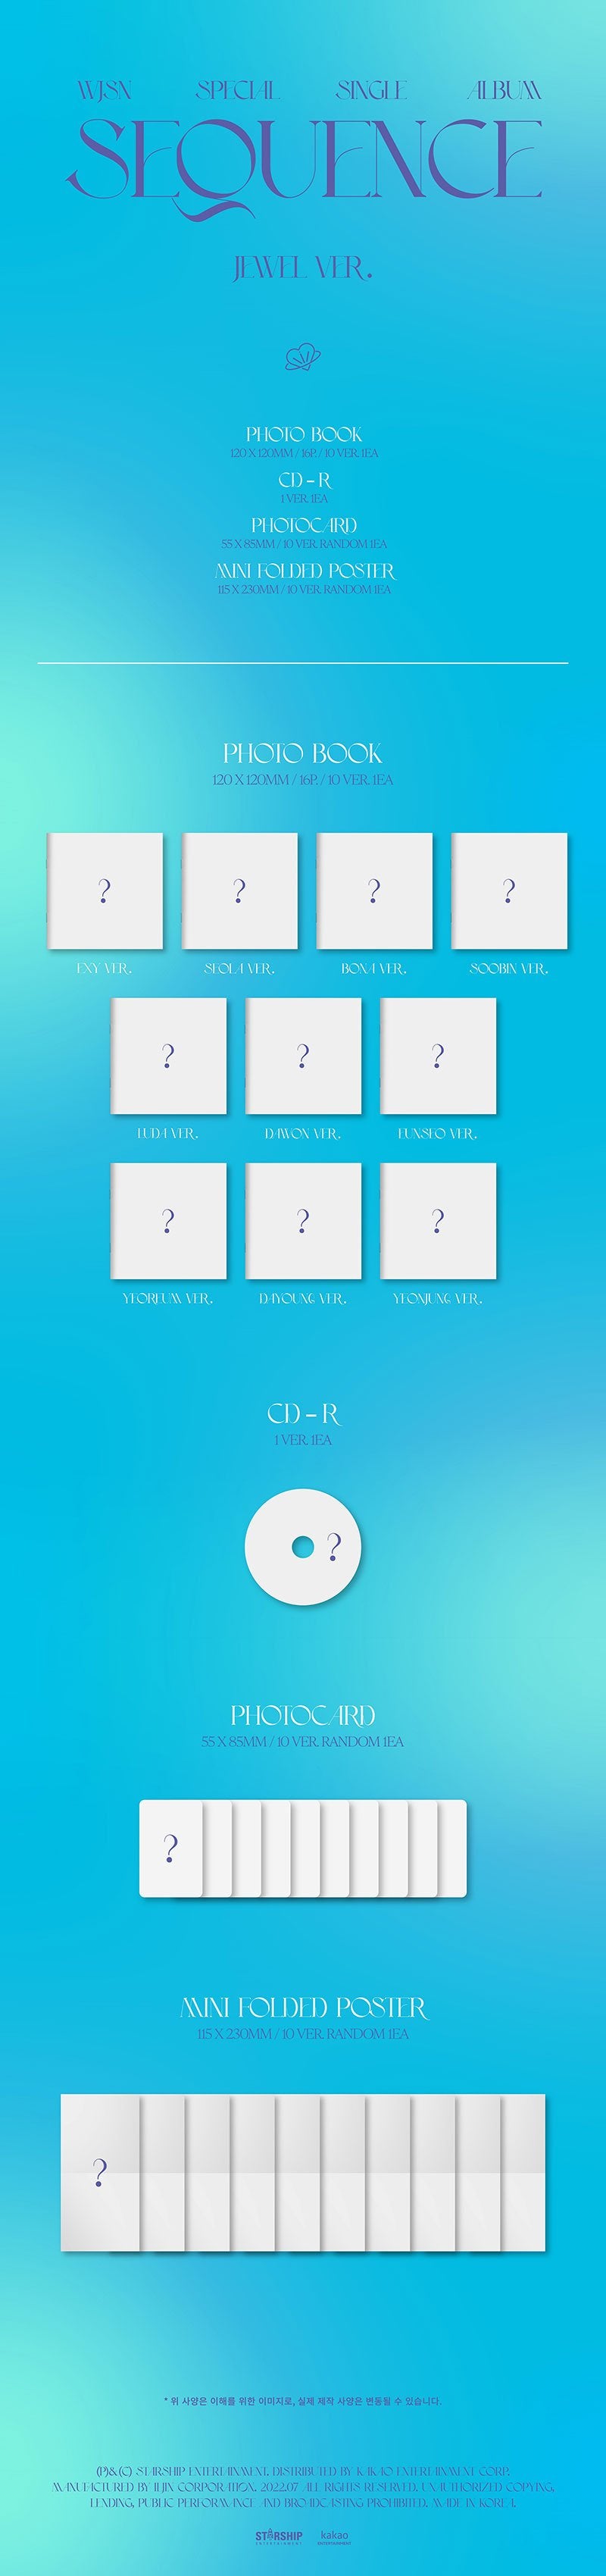 WJSN - Sequence (Special Single Album) Jewel Ver. [Limited Edition]